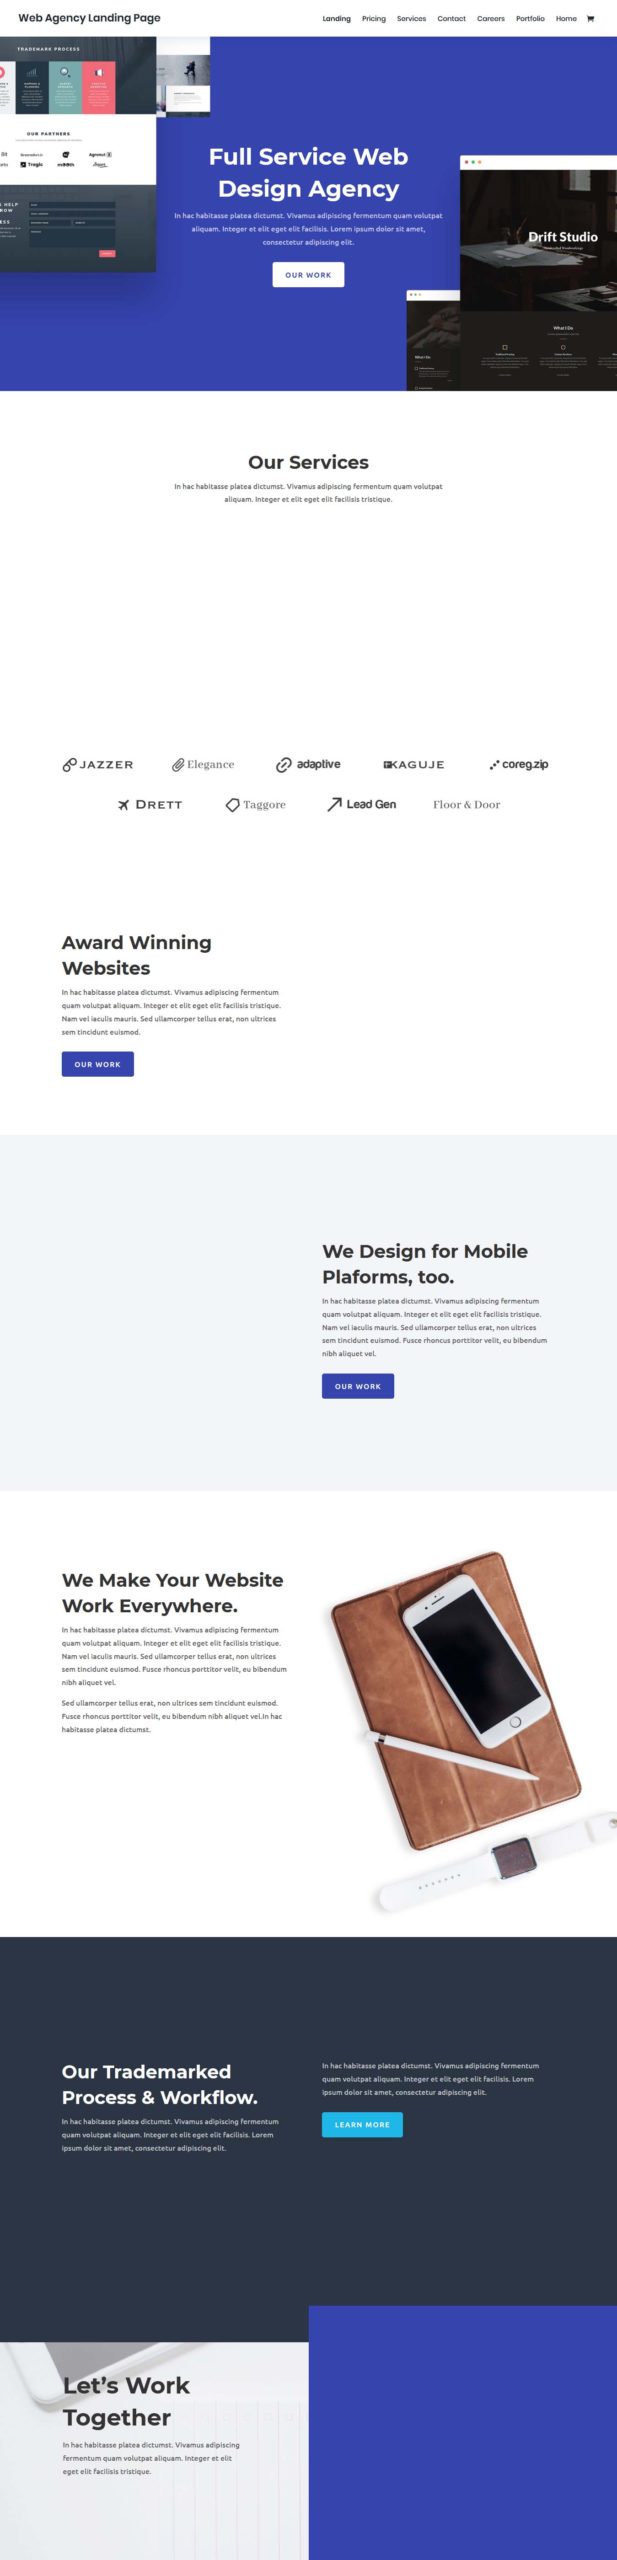 Web Agency Landing Page scaled 1 | Nexro Developers